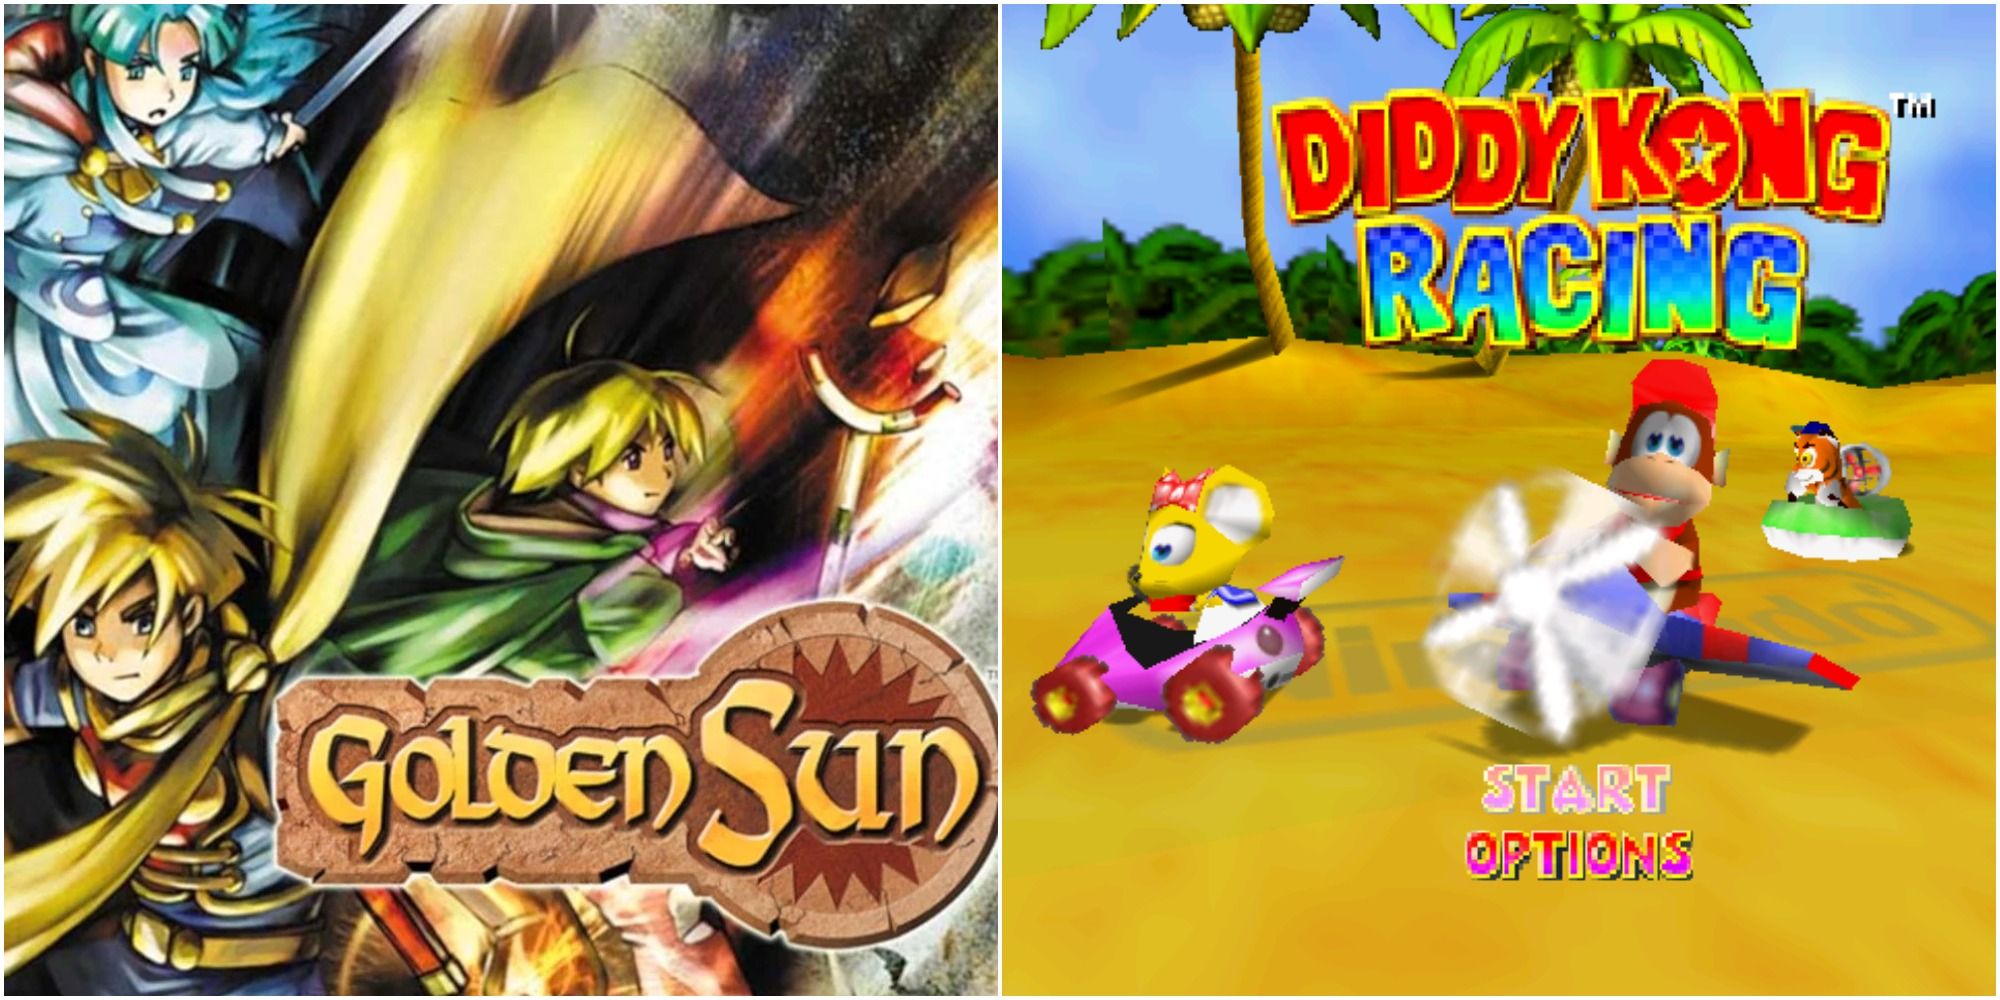 Switch Missing Retro Games Feature Image Split Golden Sun Cover On One Side & Diddy Kong Racing Title Screen On Other Side